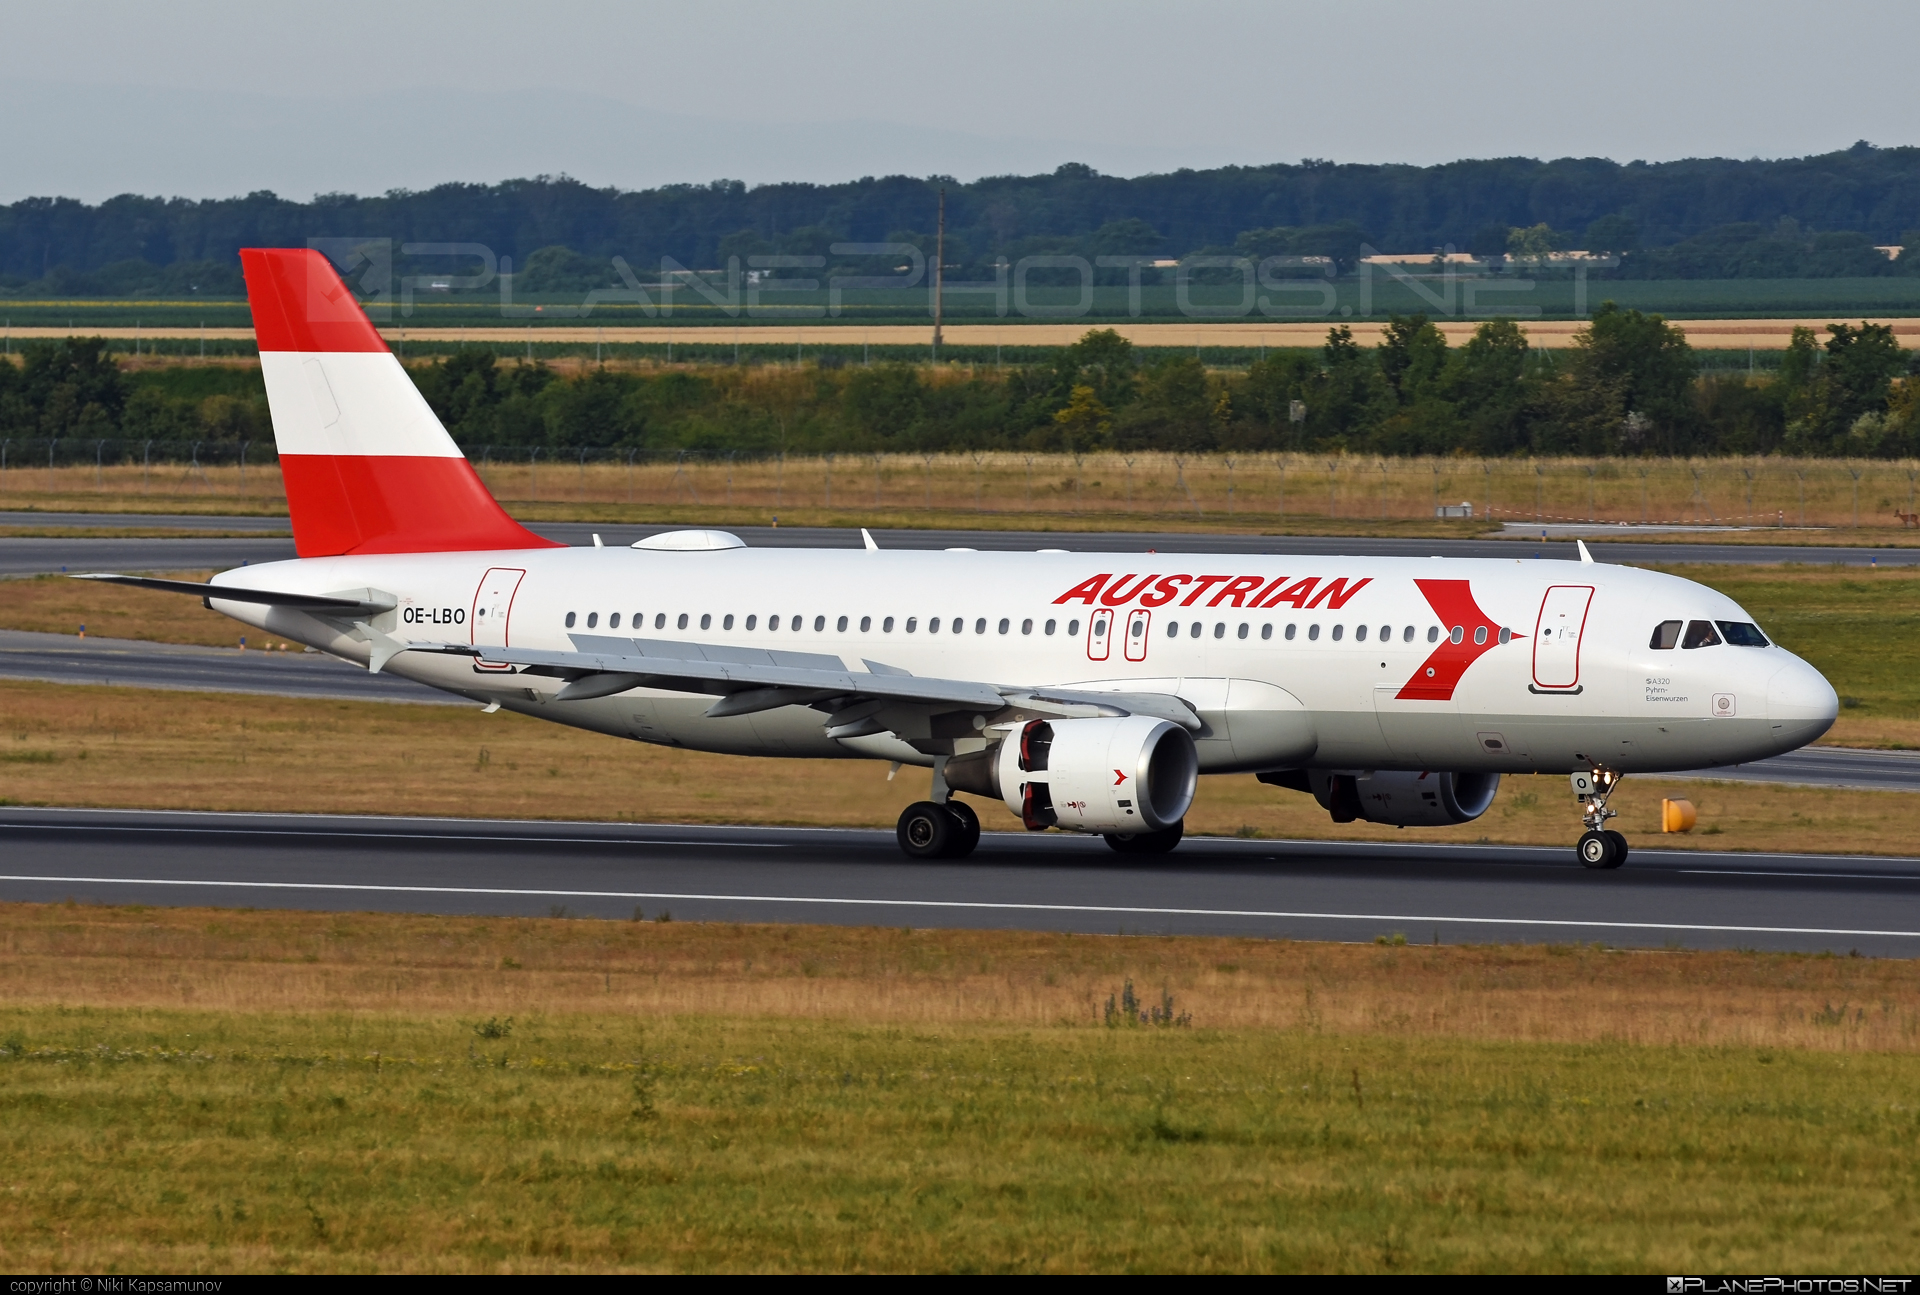 Airbus A320-214 - OE-LBO operated by Austrian Airlines #a320 #a320family #airbus #airbus320 #austrian #austrianAirlines